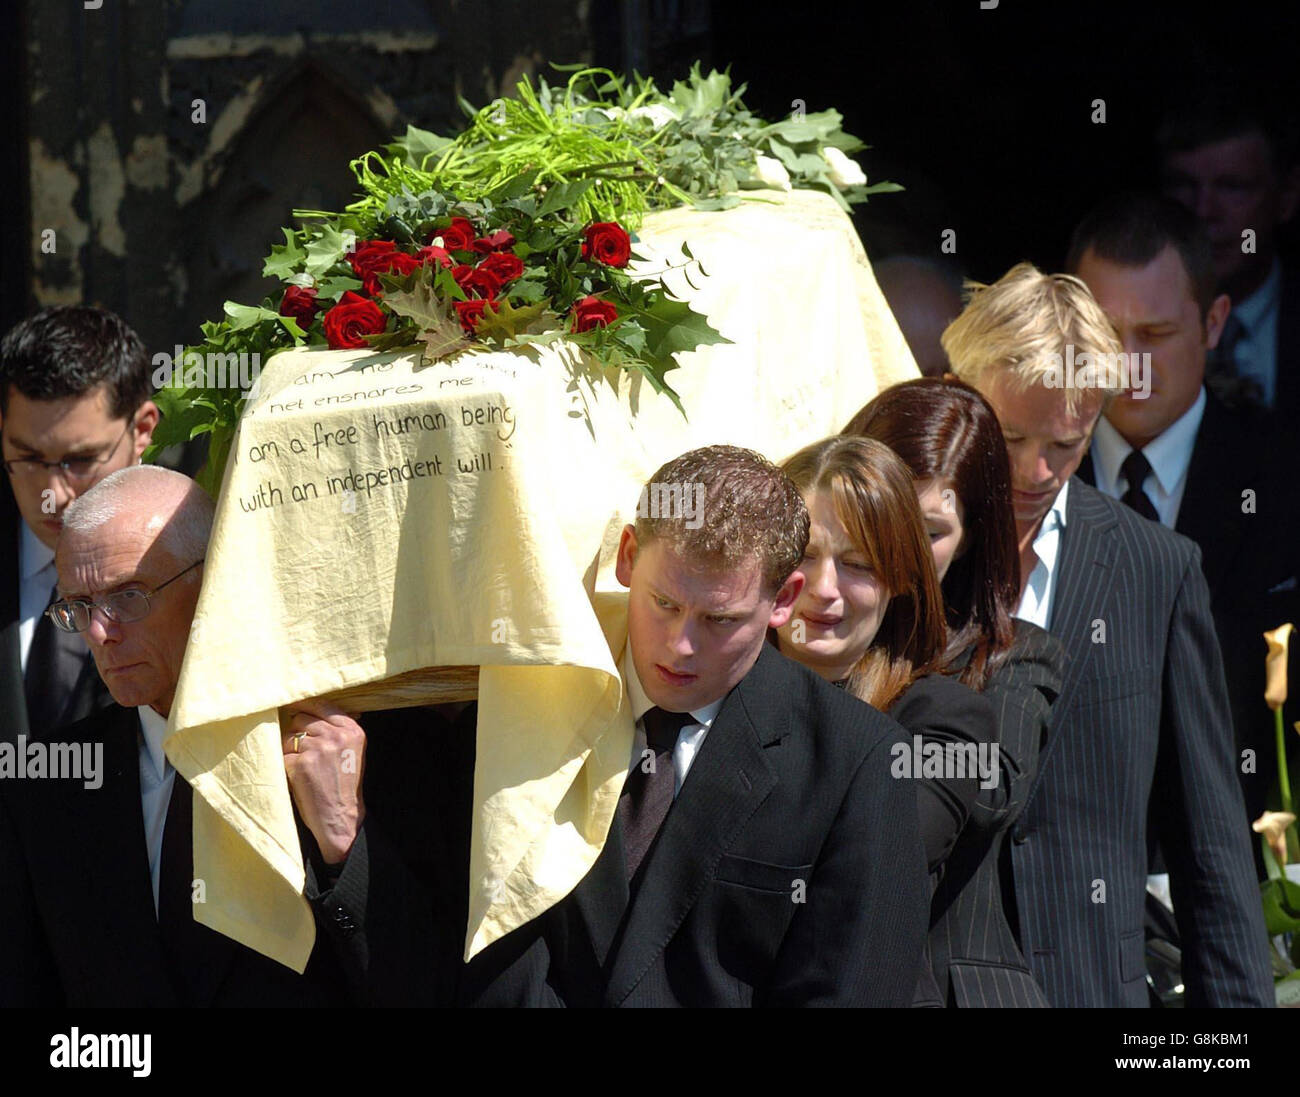 The coffin of London bomb victim Jenny Nicholson is carried from her funeral service at Bristol Cathedral. Hundreds of mourners gathered to remember the talented young musician who was killed in the London bomb attacks. Vicar's daughter Jennifer Nicholson, 24, who lived in Reading with her boyfriend, died in the explosion at Edgware Road tube station on July 7. Stock Photo